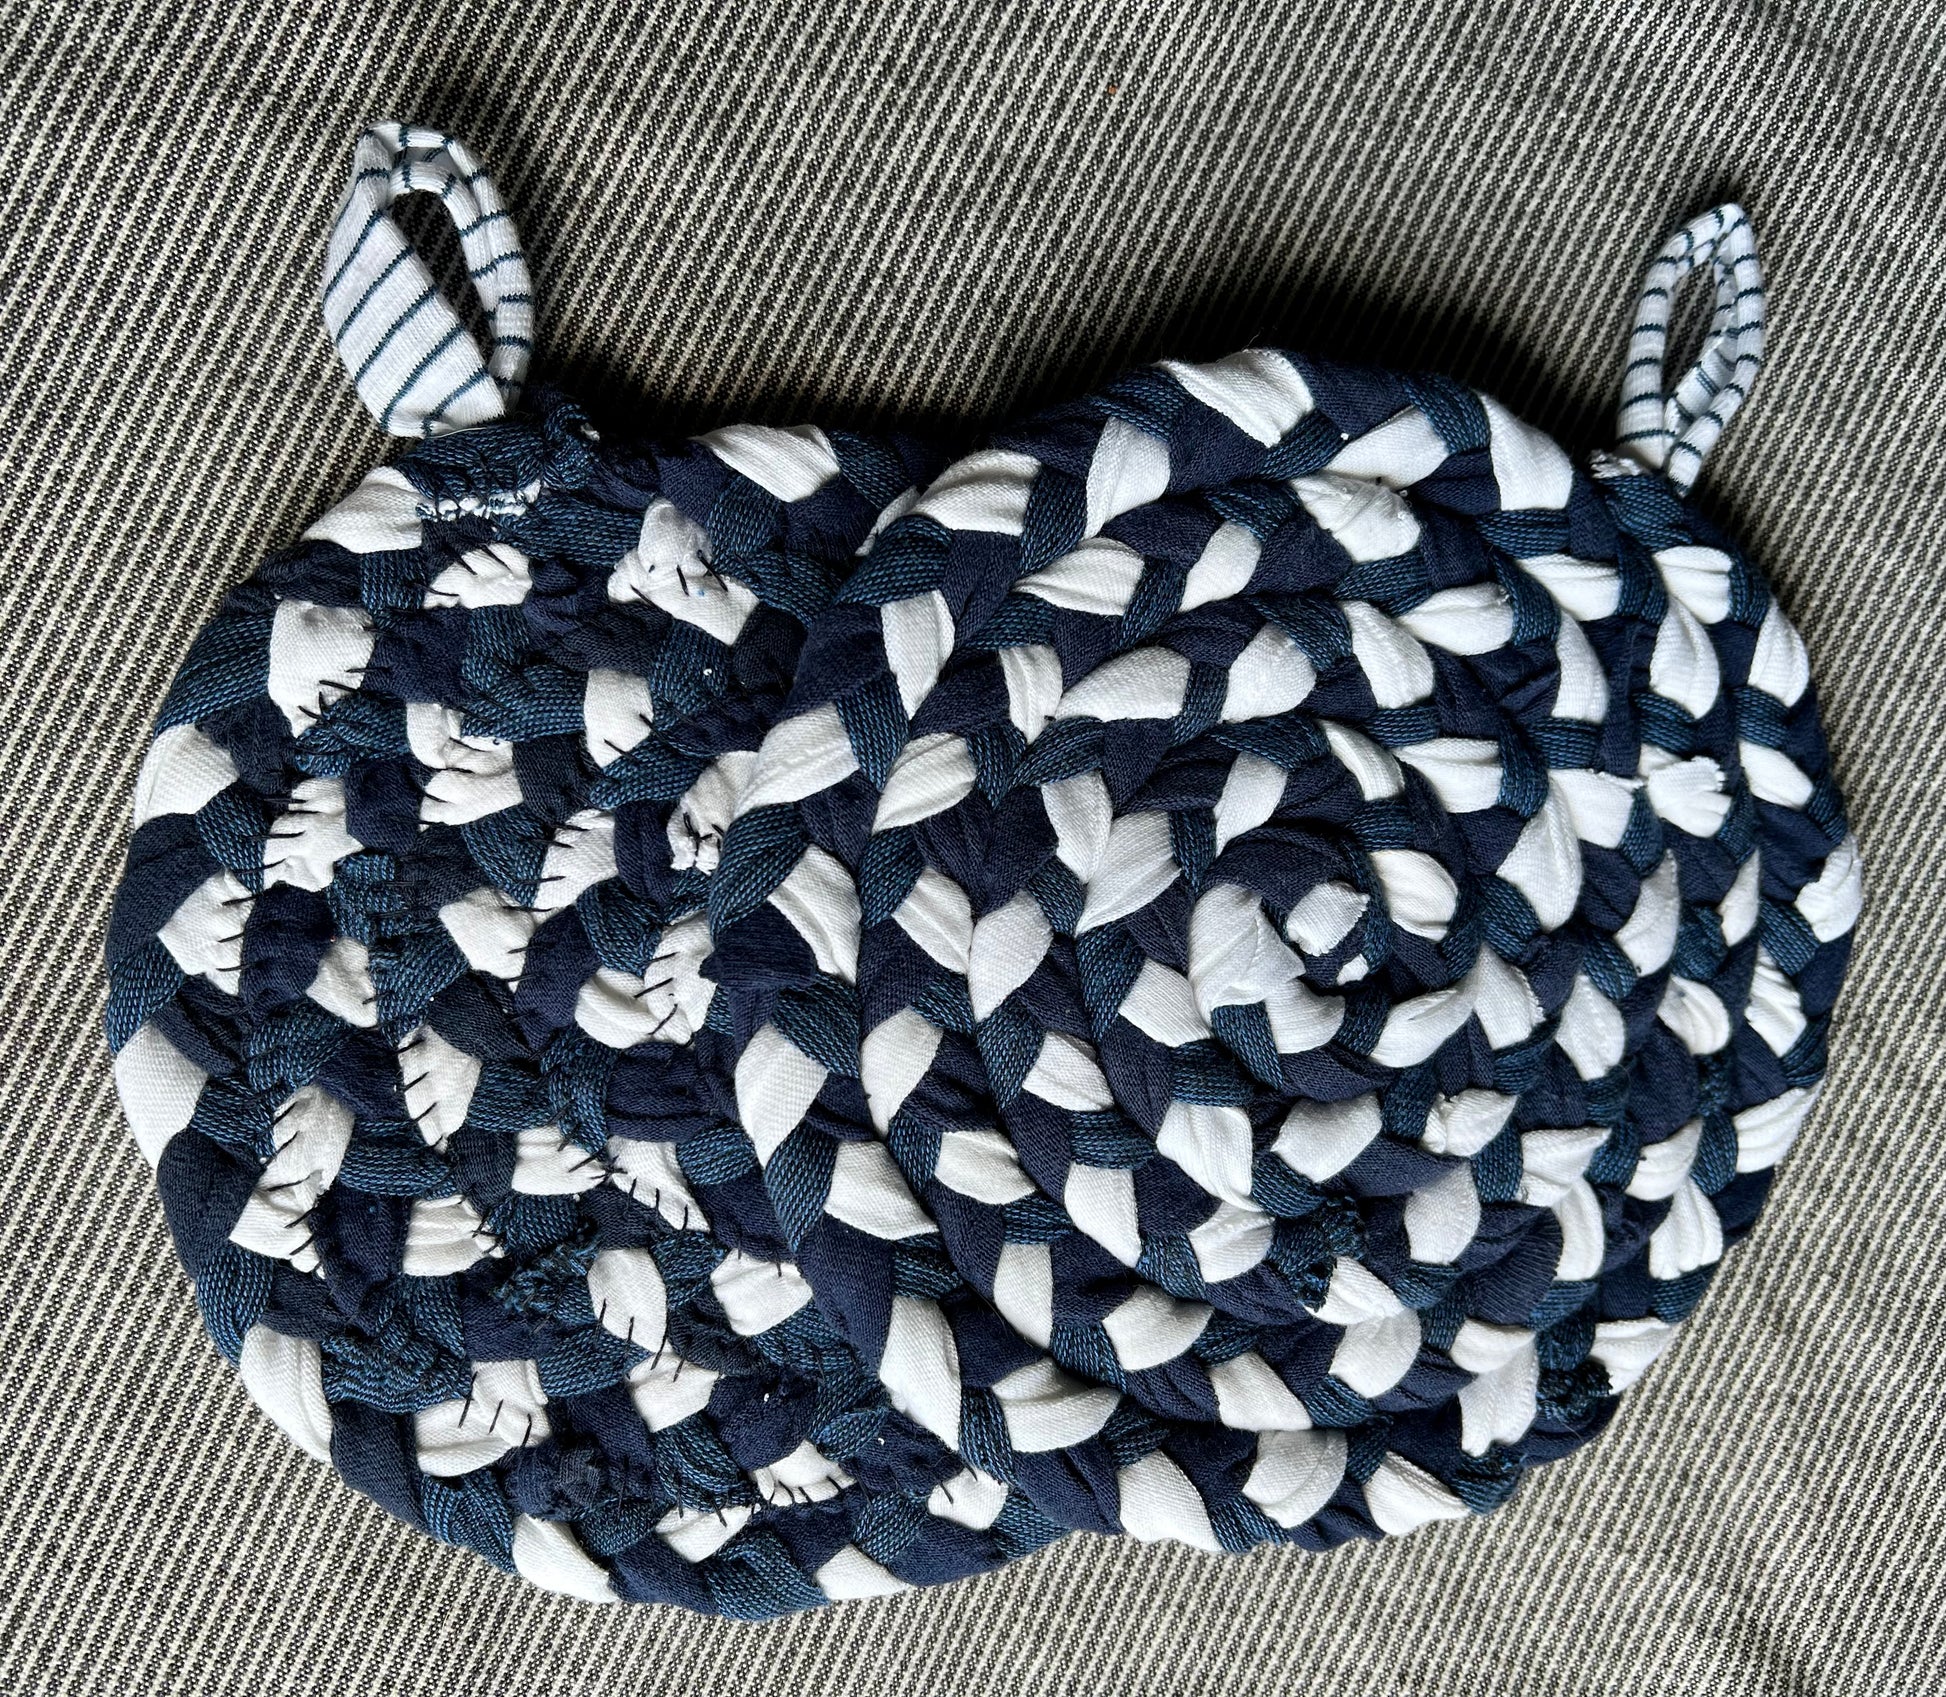 A set of two trivet potholders, side by side, lay flat on a fabric surface.